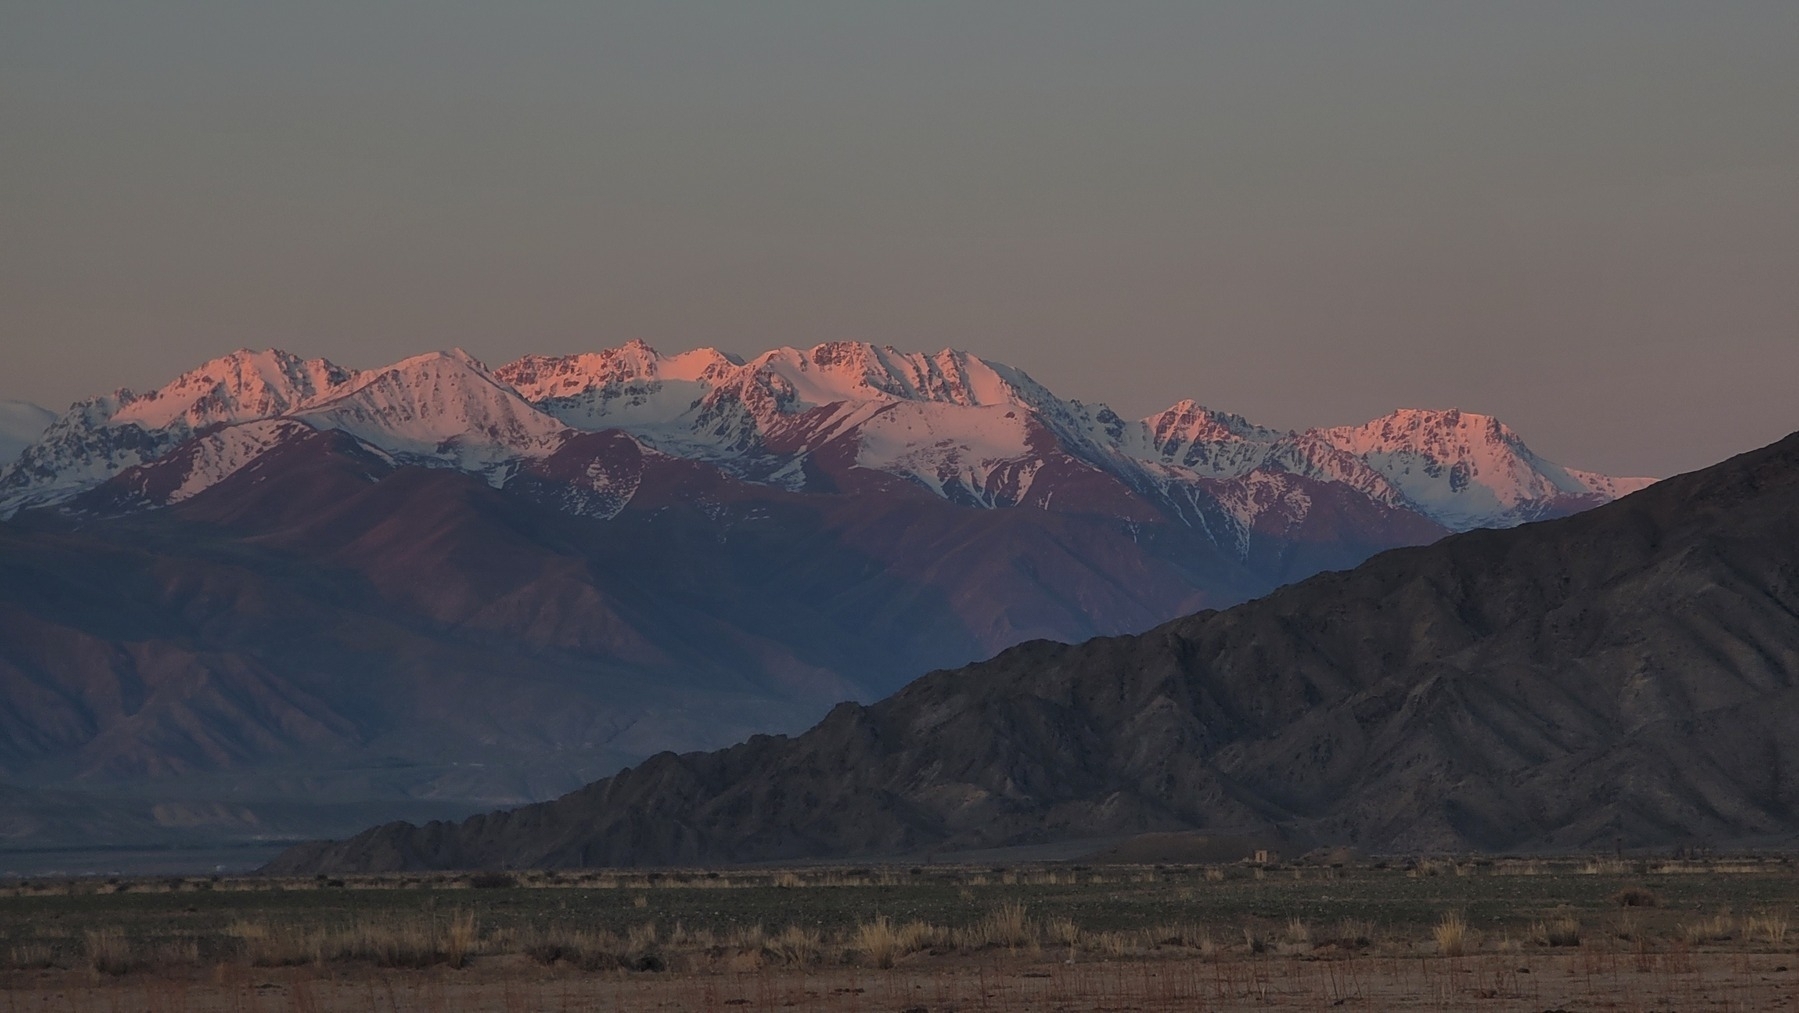 snow-capped mountains with pink morning light reflecting off the tops